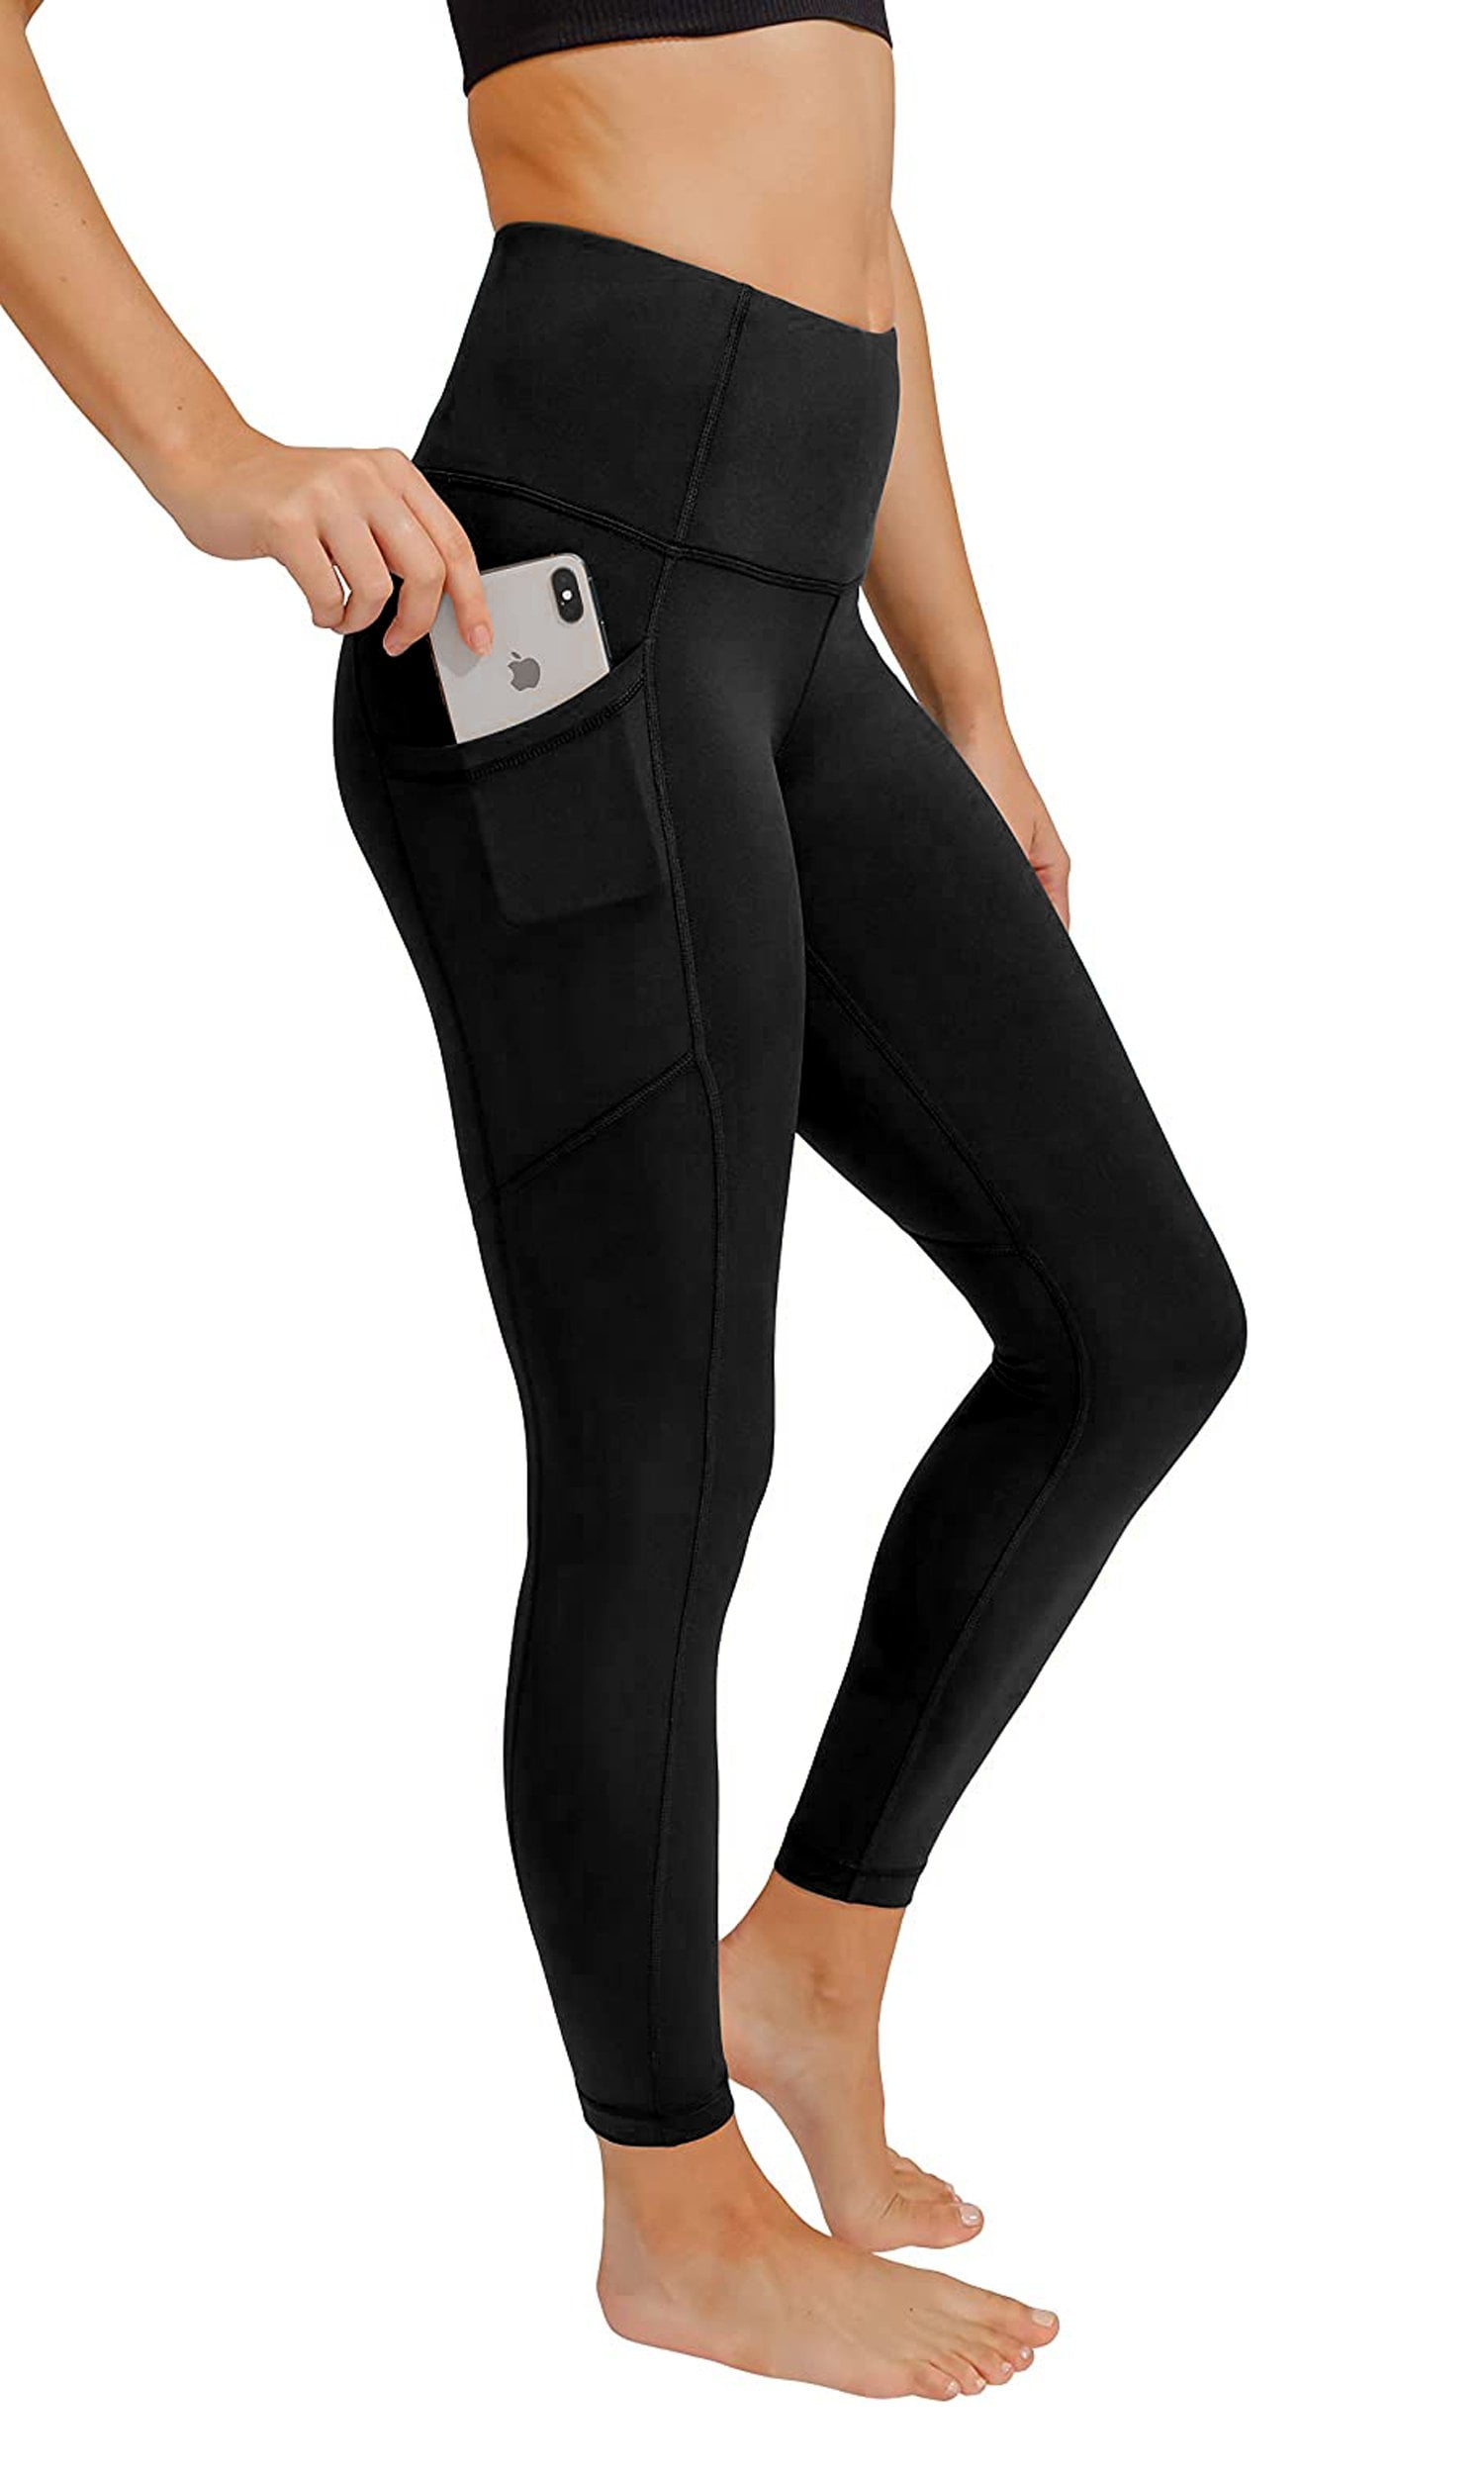 Eedor High Waist Yoga Pants with Pockets Tummy Control Full-Length Workout Leggings for Women